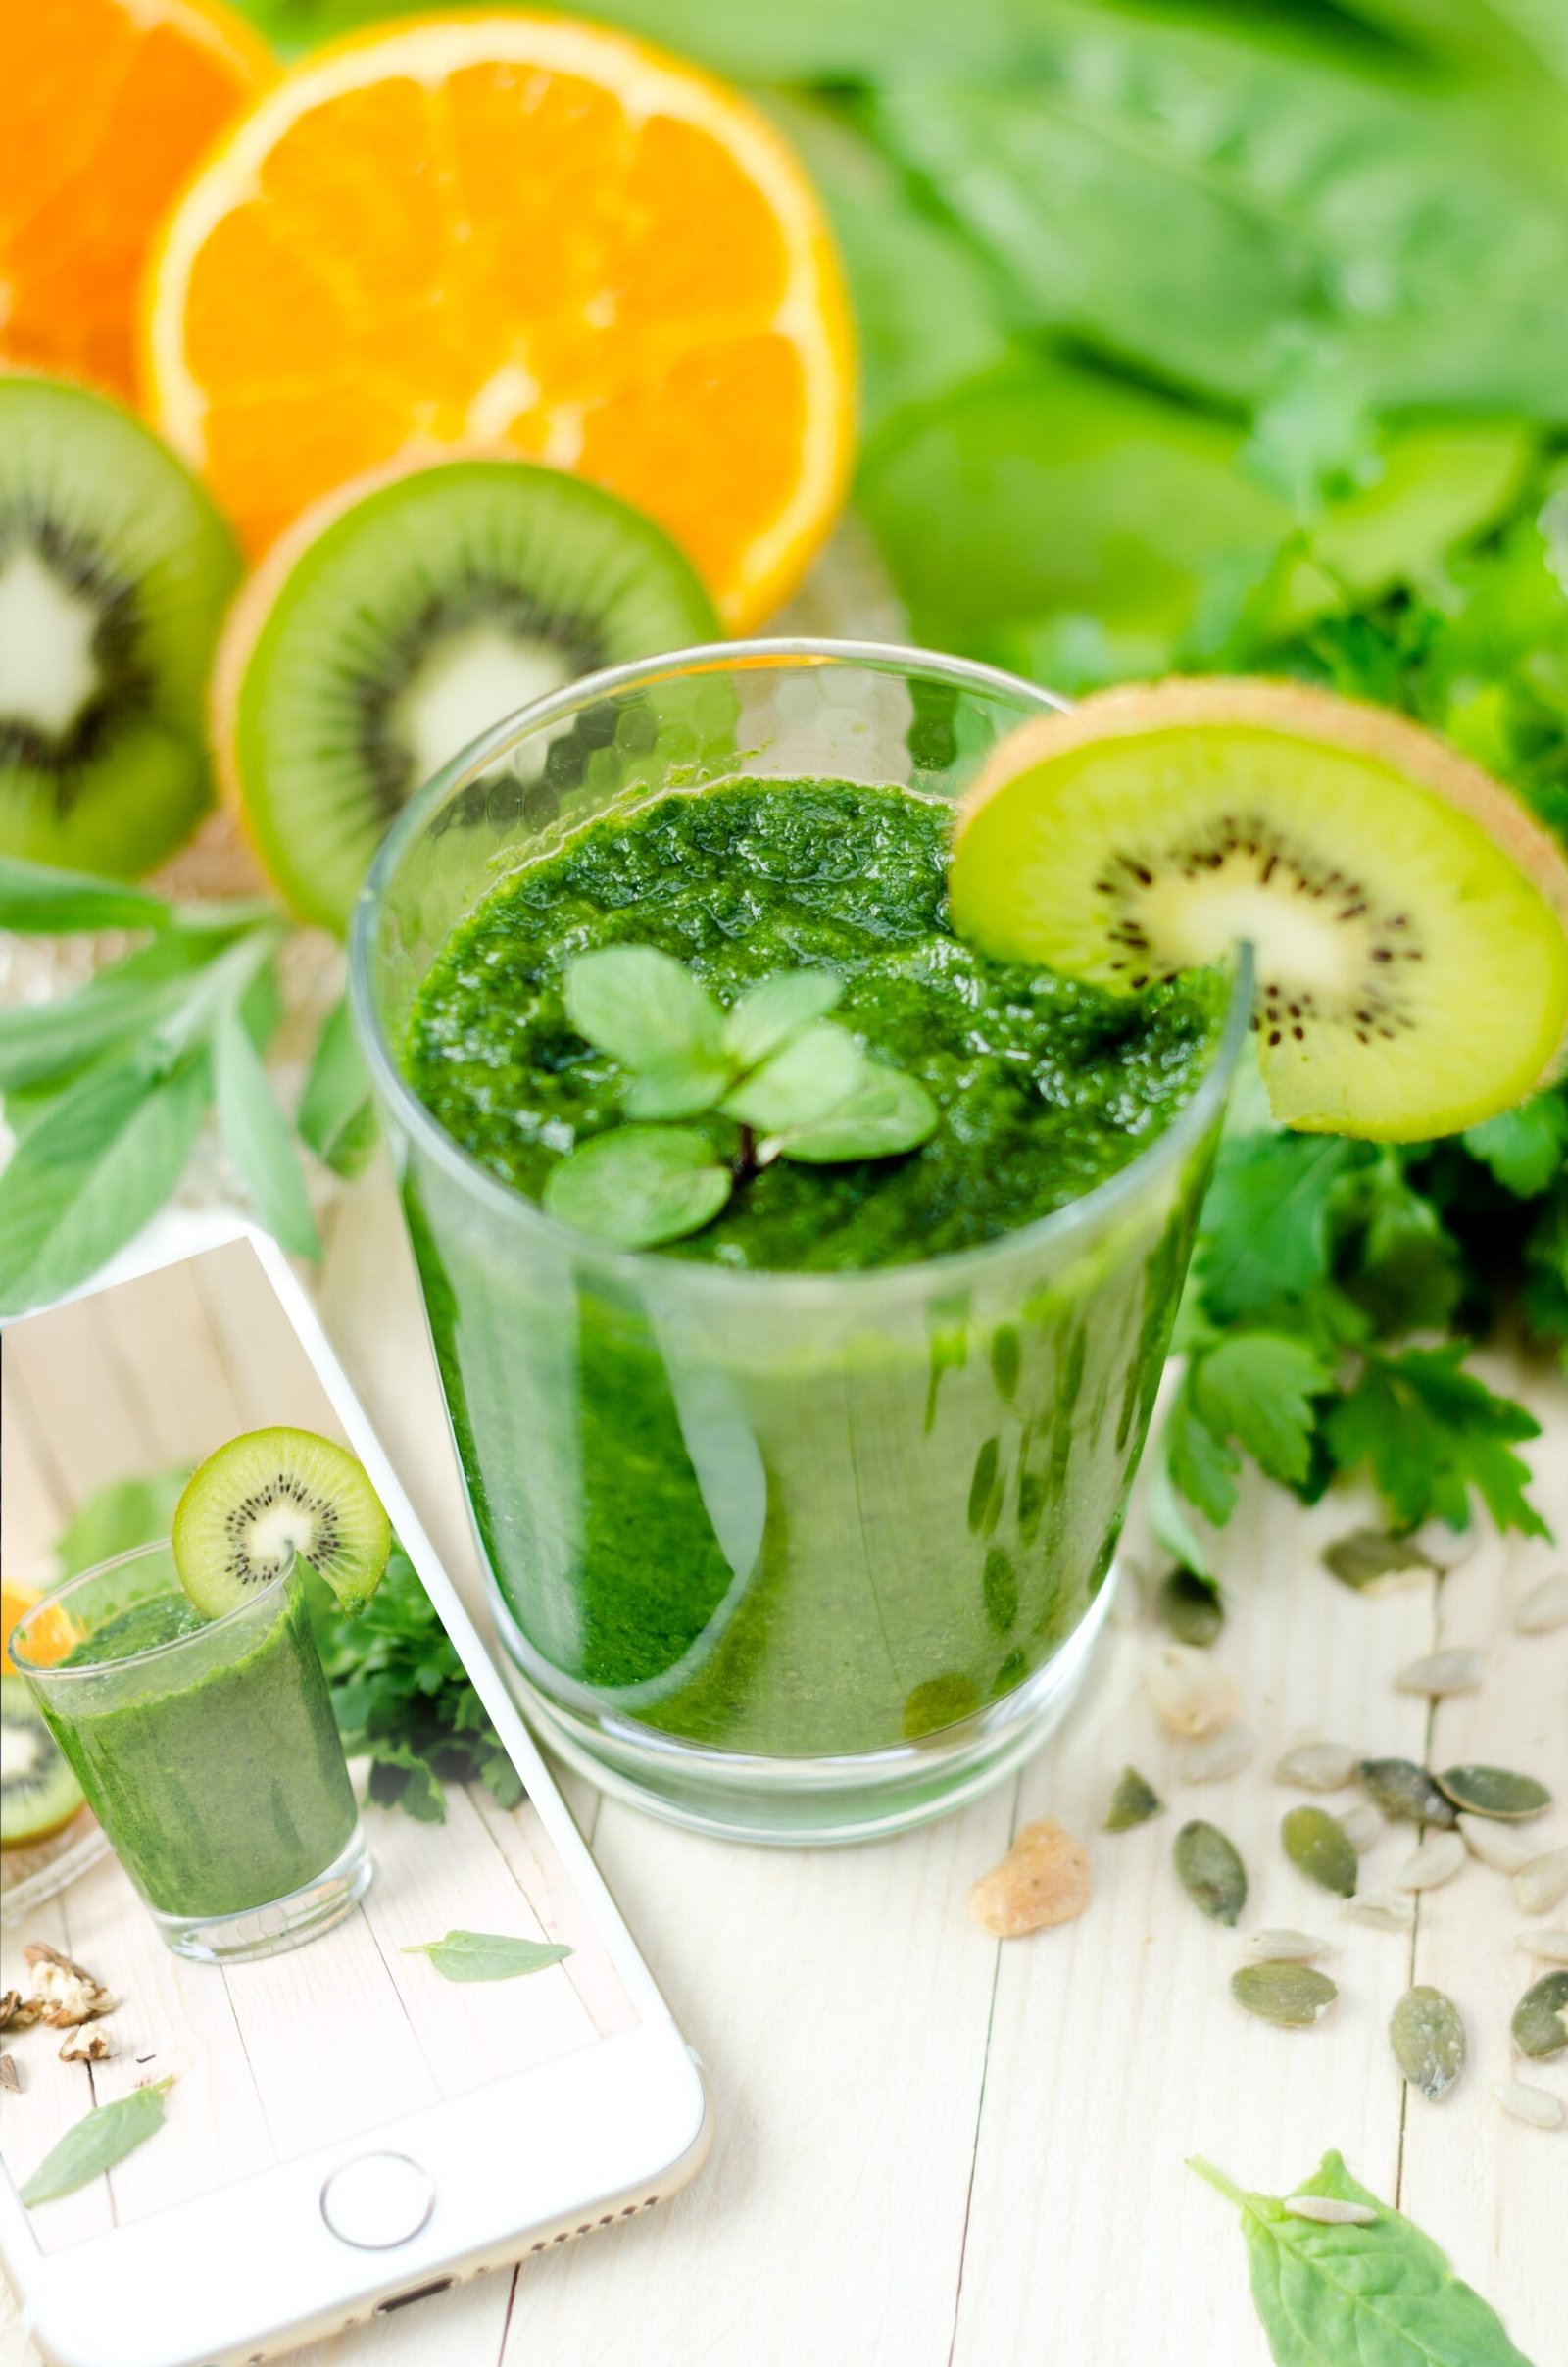 Spirulina for smoothies